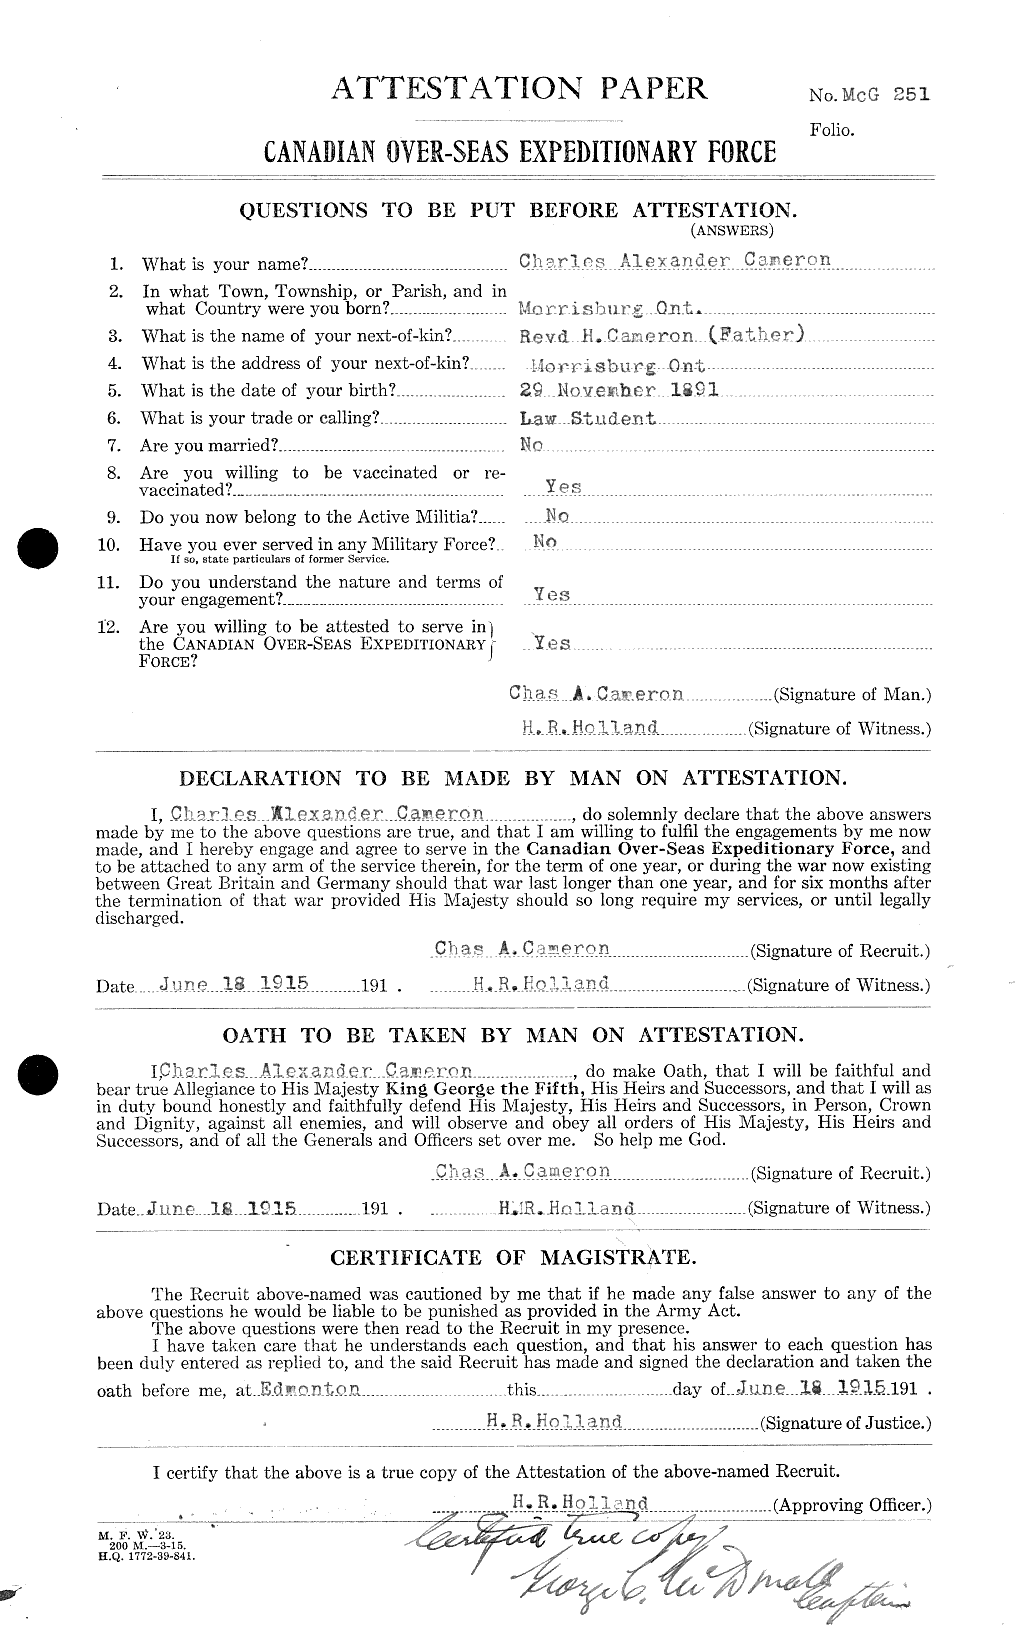 Personnel Records of the First World War - CEF 002600a